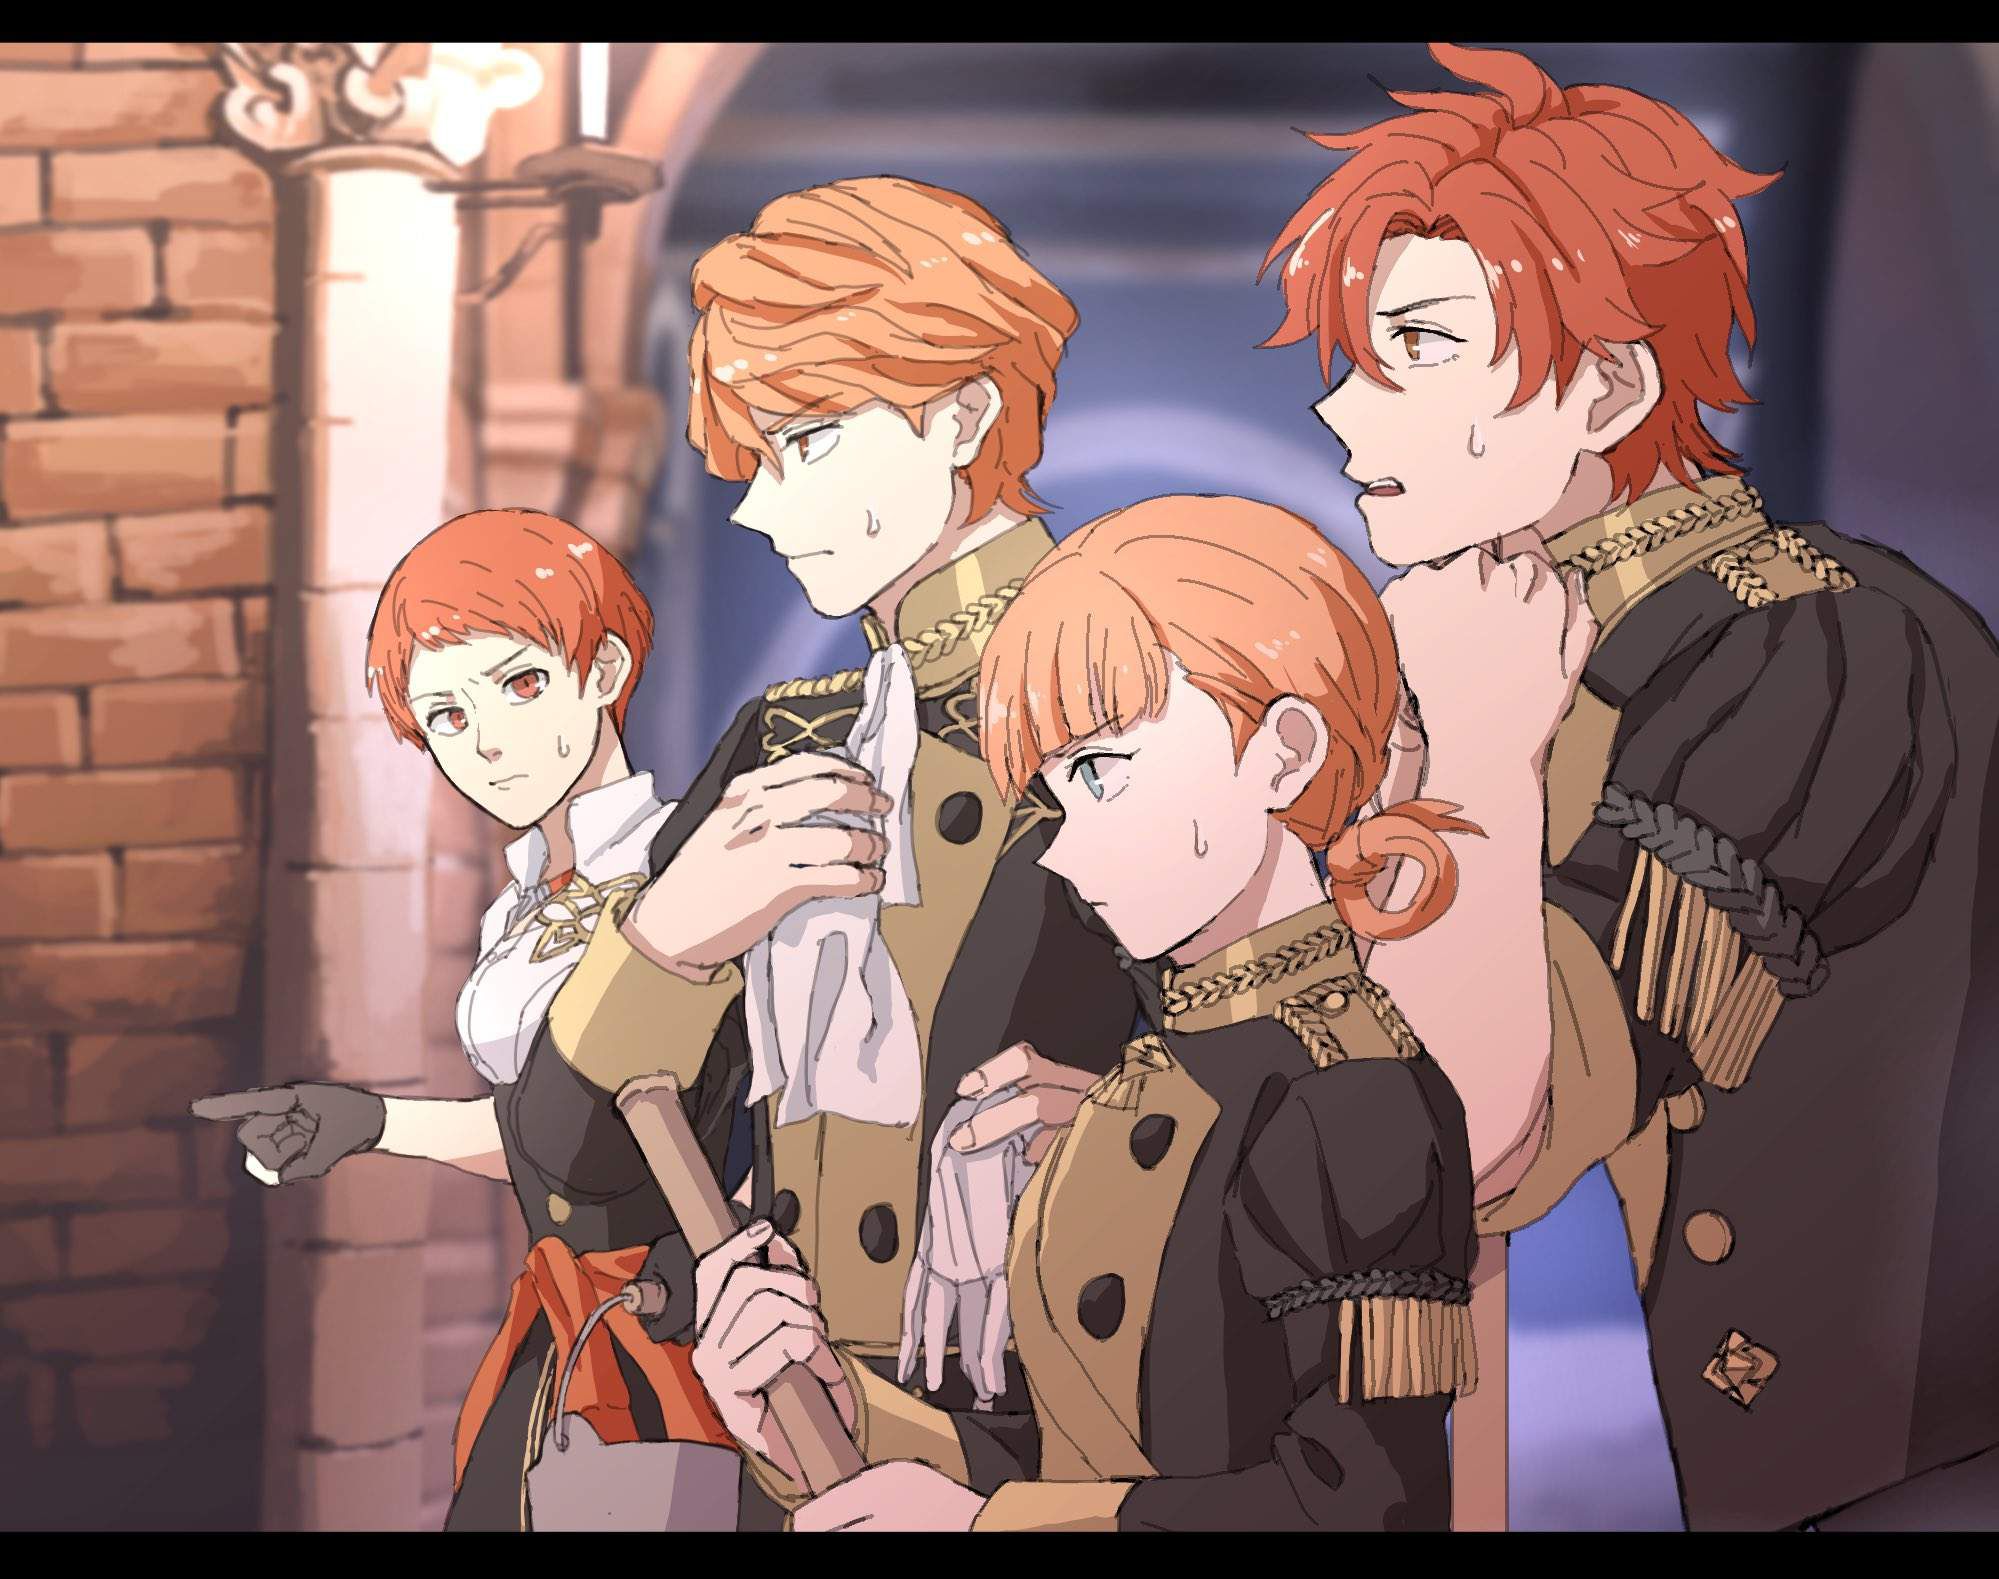 Gather those who want to nudge with the erotic images of Fire Emblem! 1